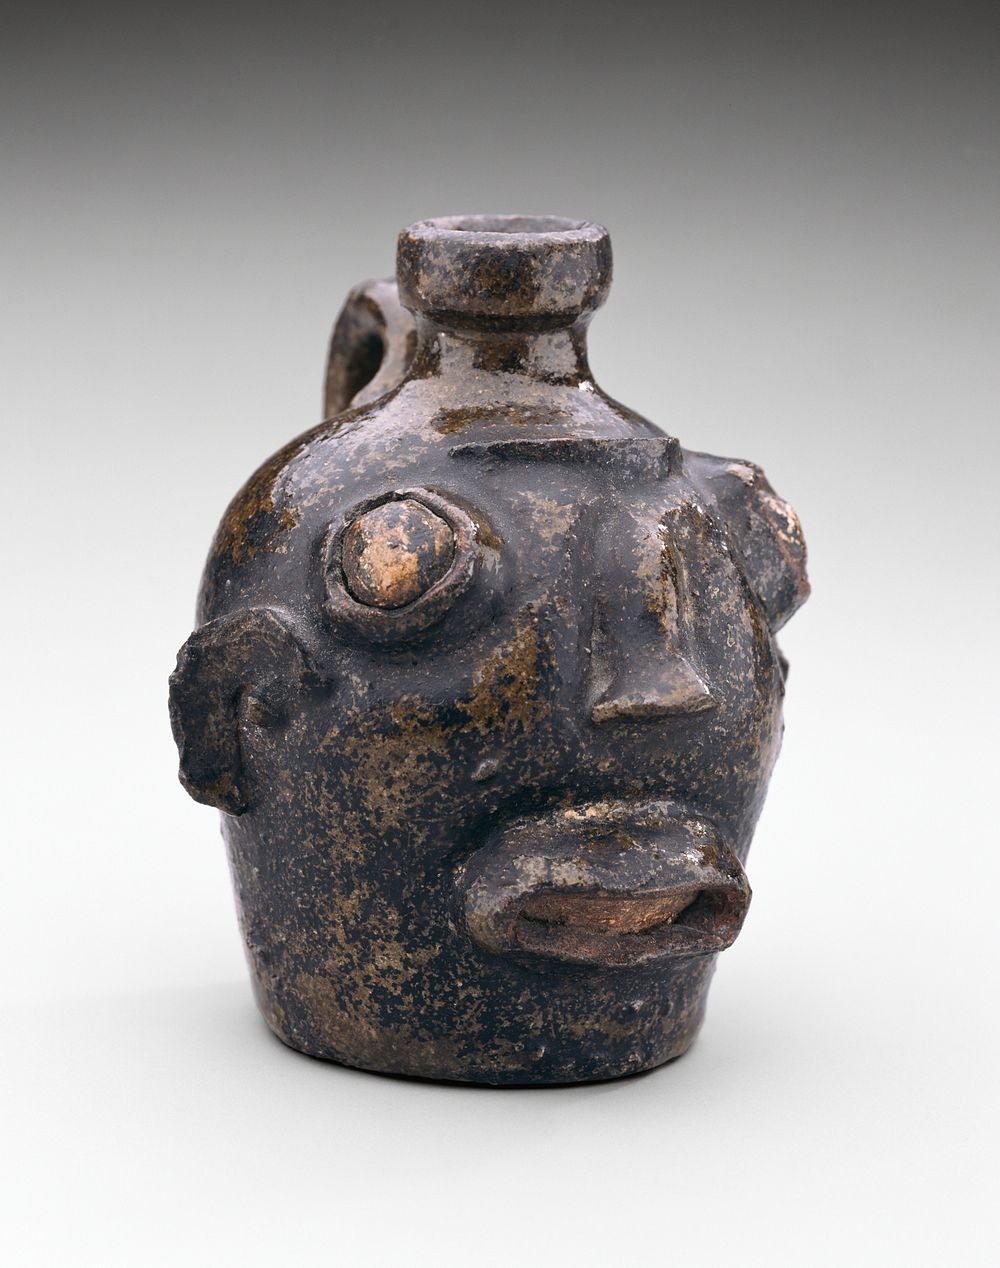 Face Jug by Artist unknown